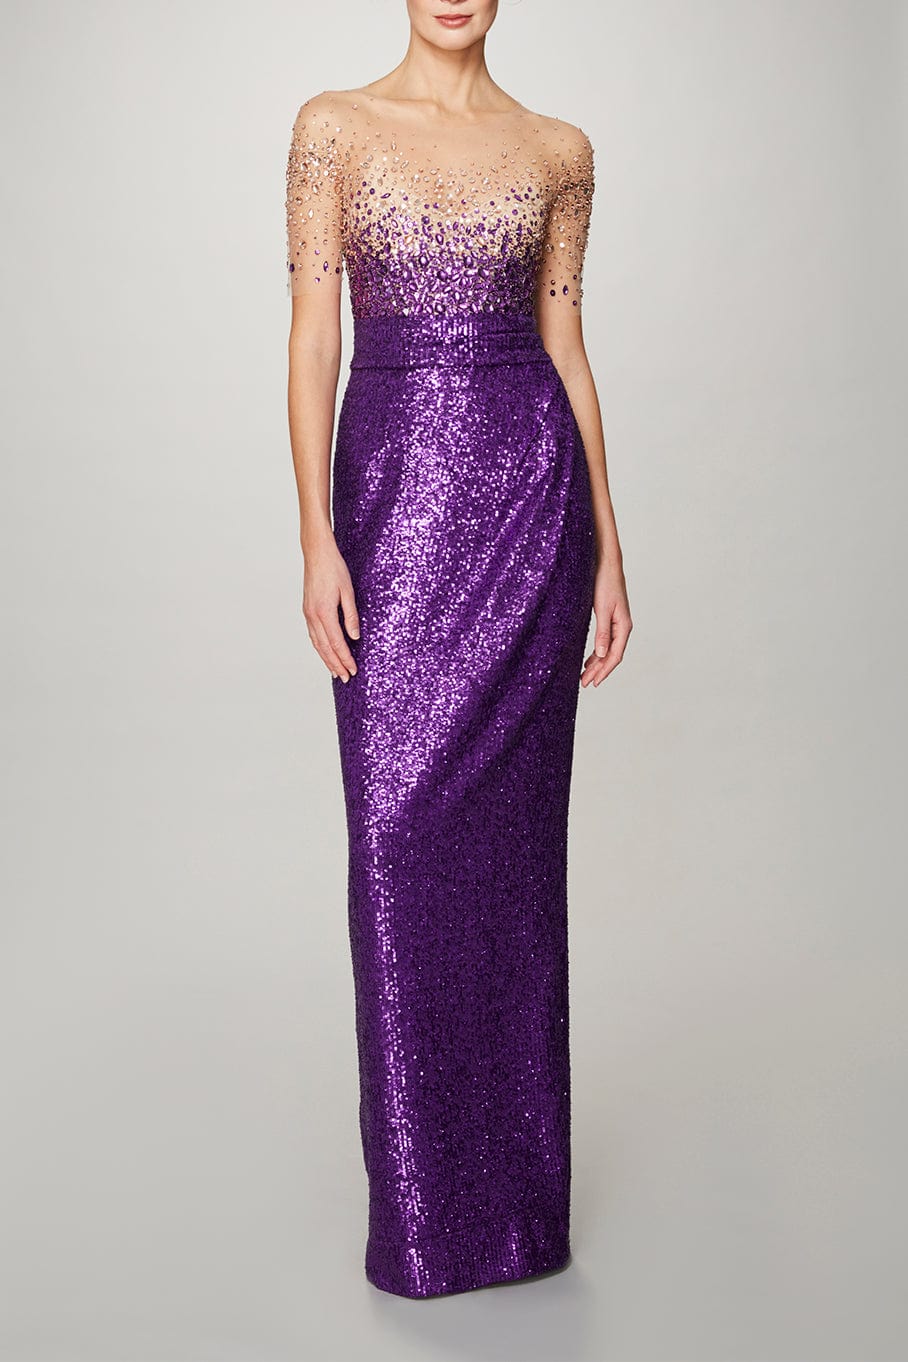 PAMELLA ROLAND-Tulle Sequin Gown-